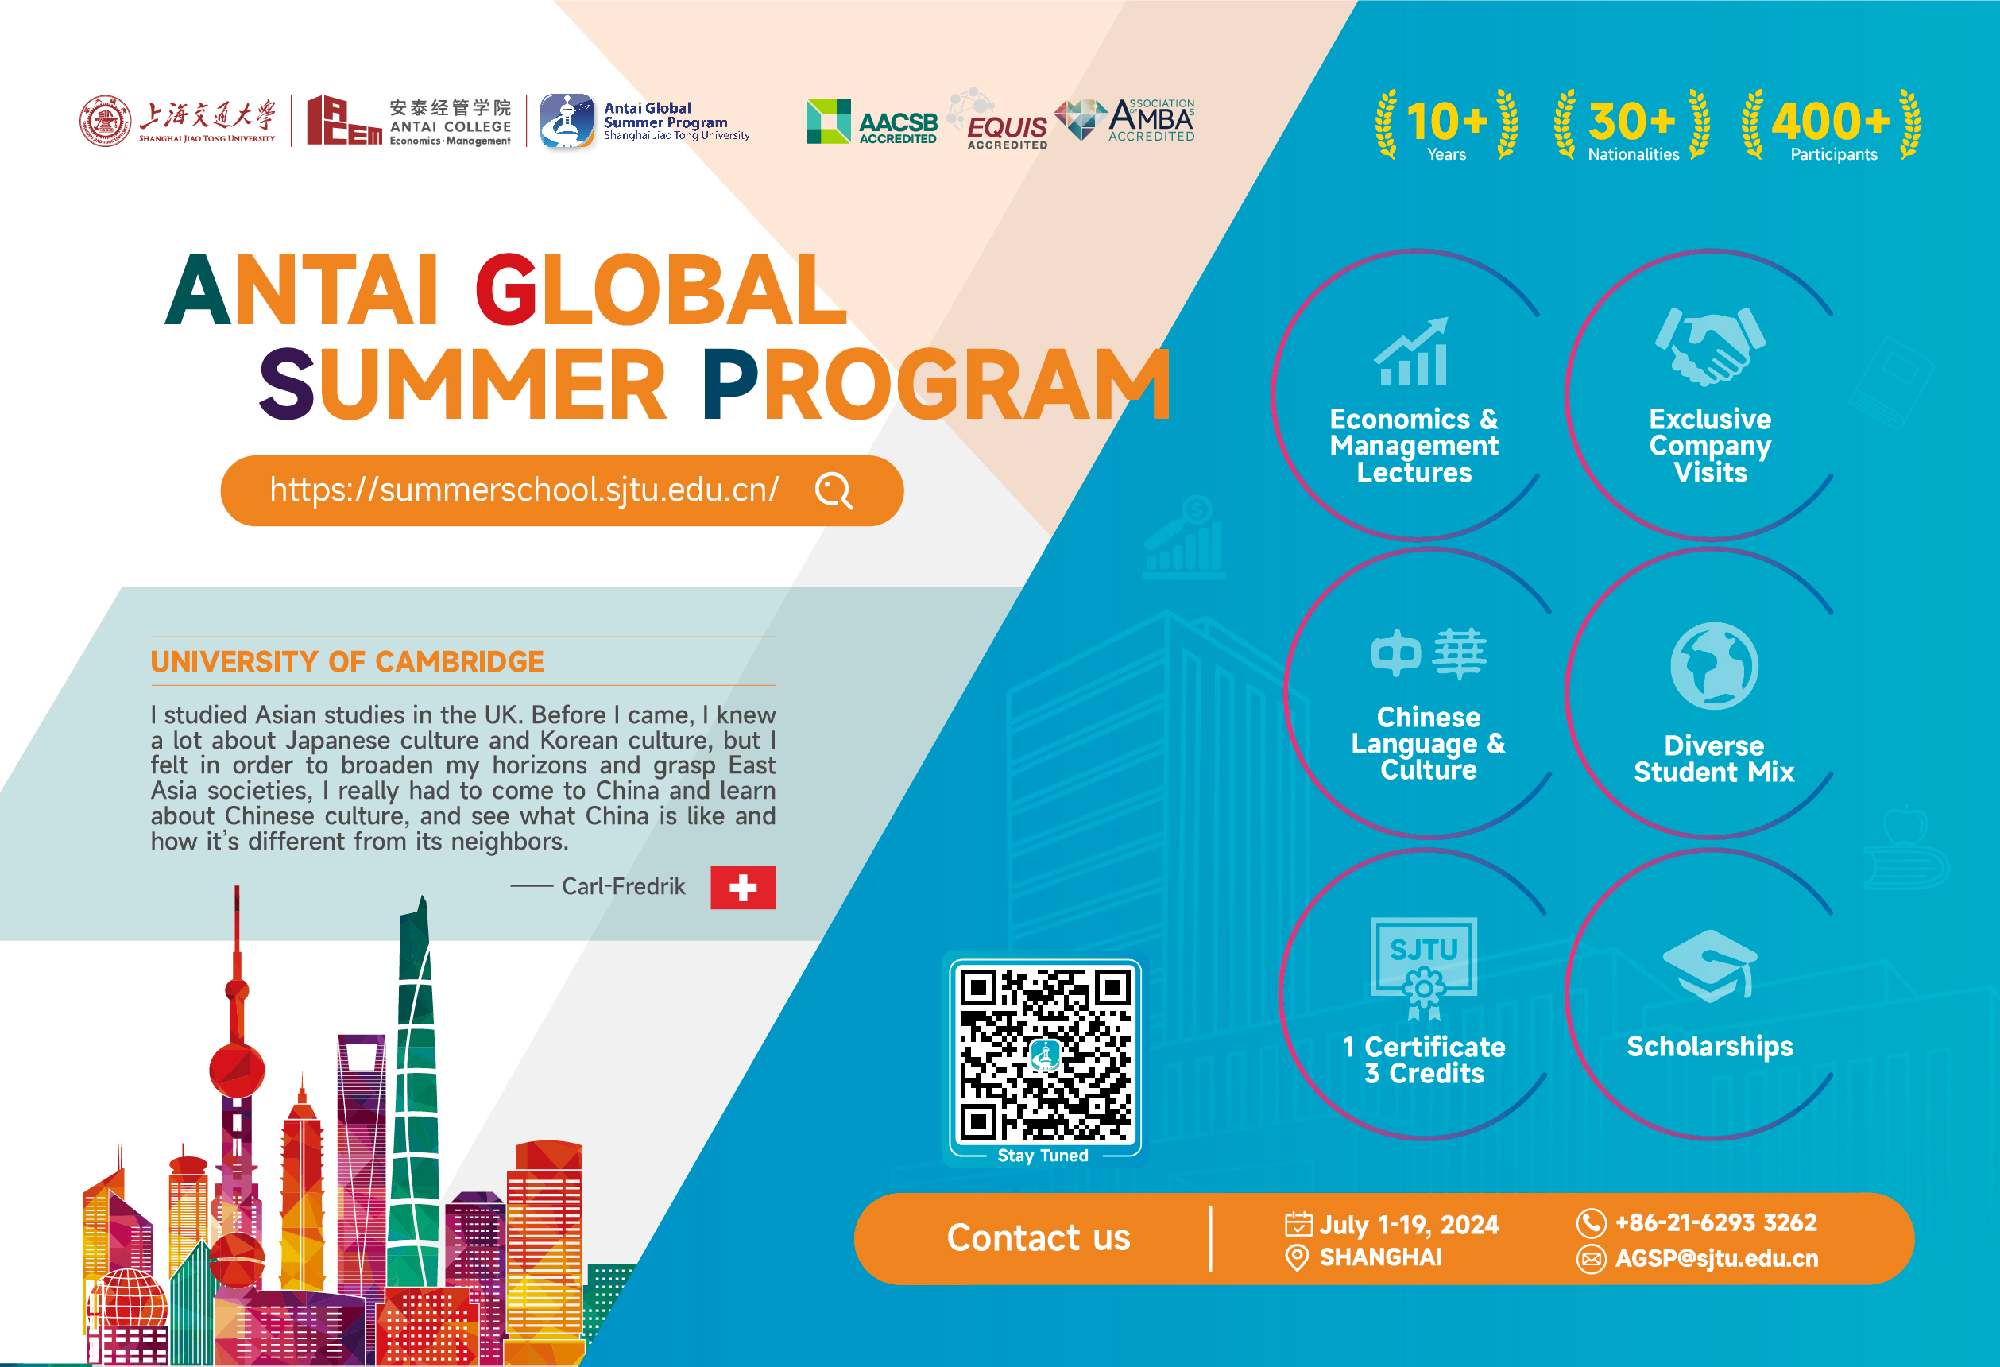 Application for the 2024 Antai Global Summer Program is now open